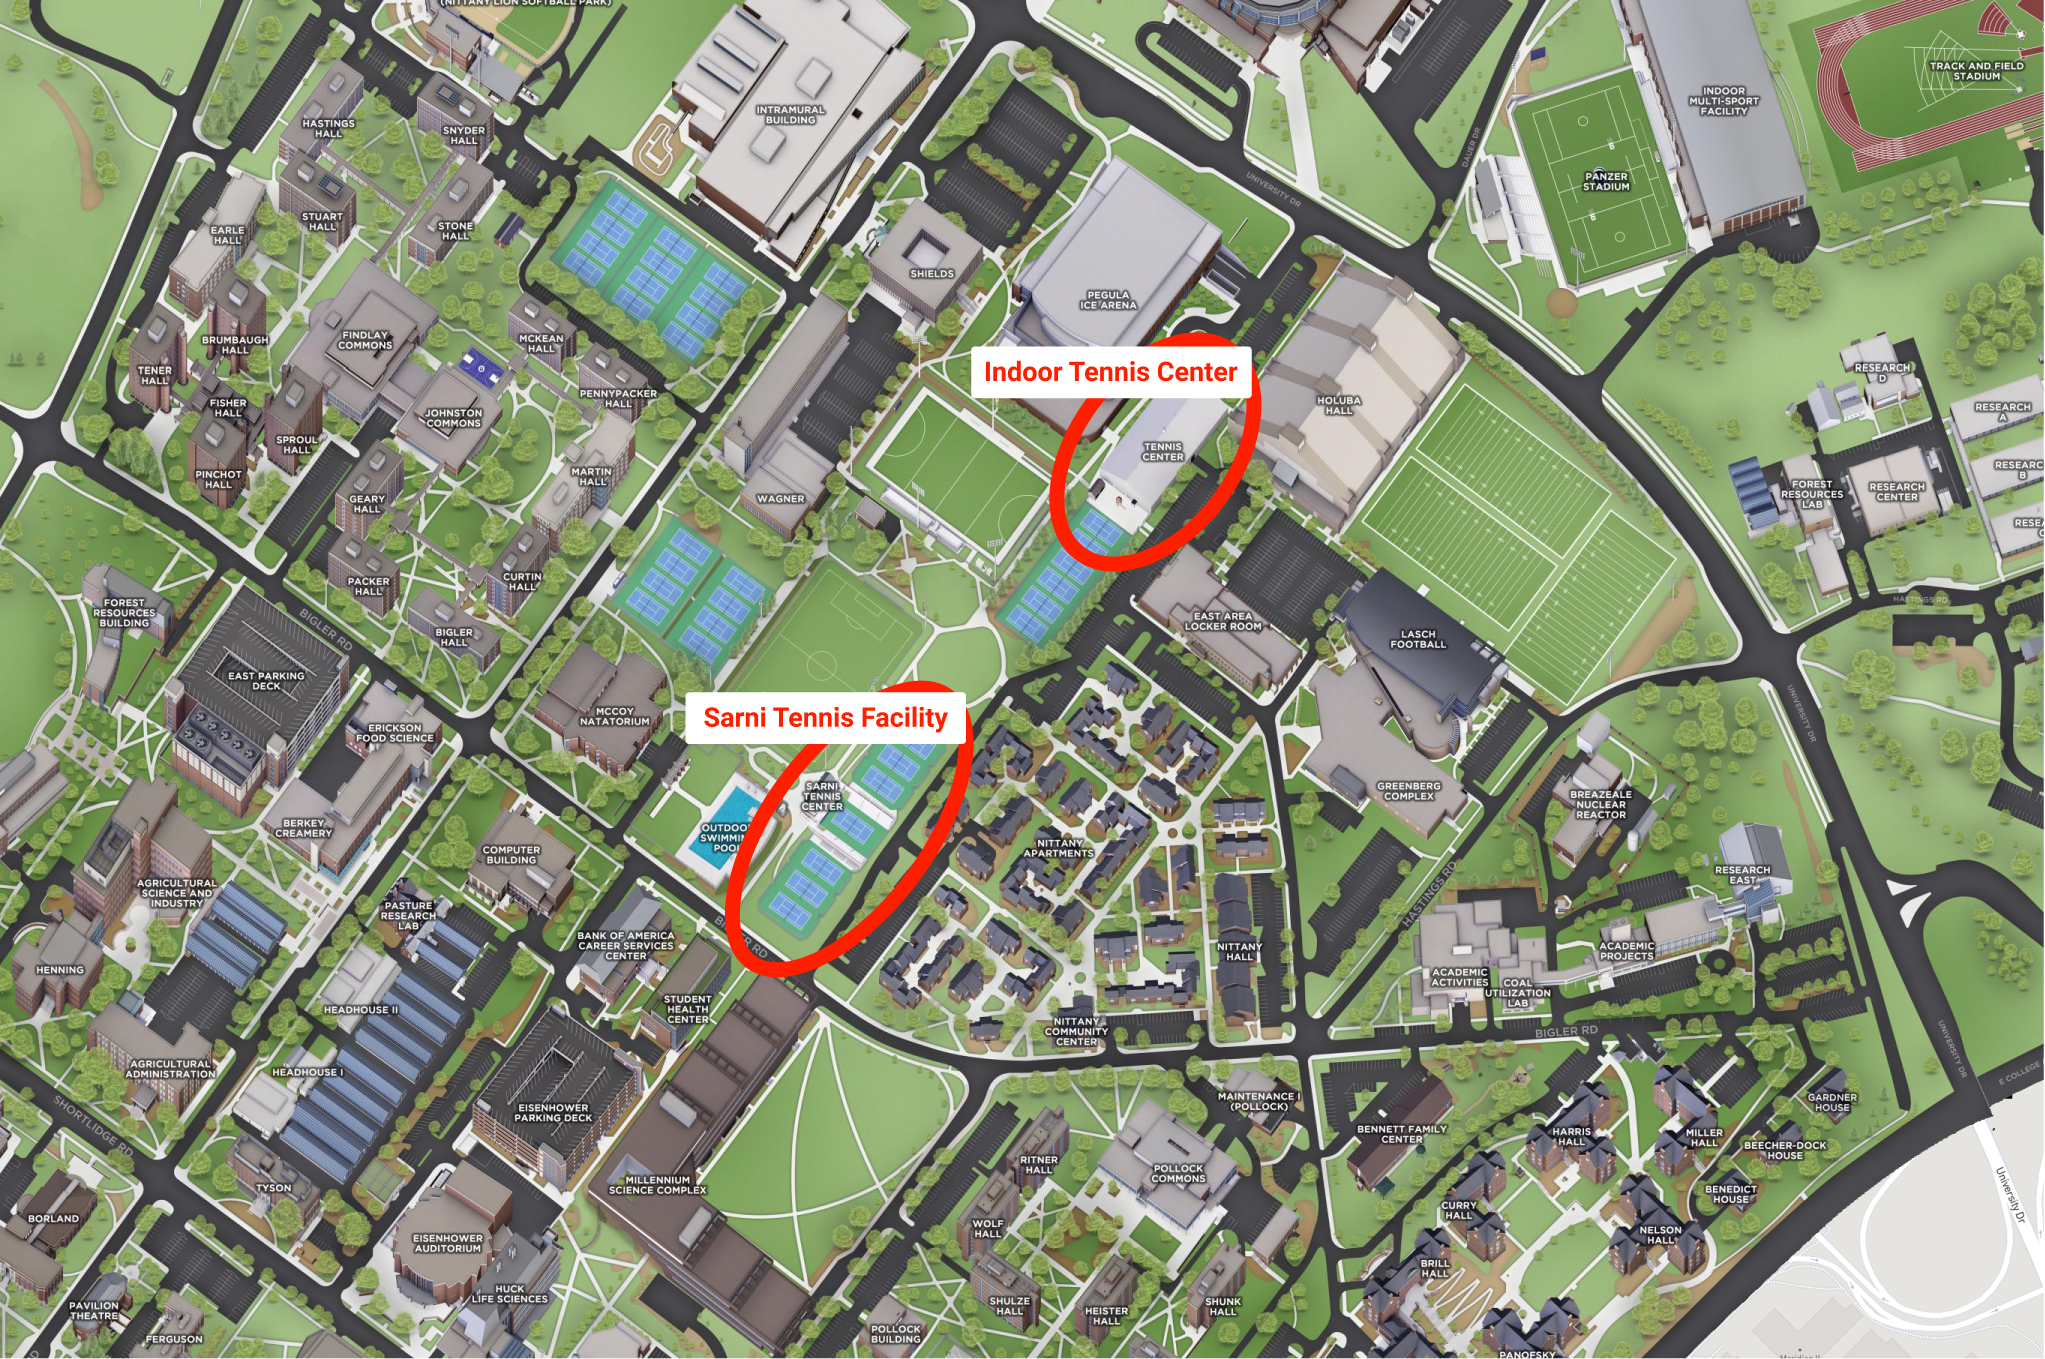 Map of tennis facilities at the Penn State University Park campus